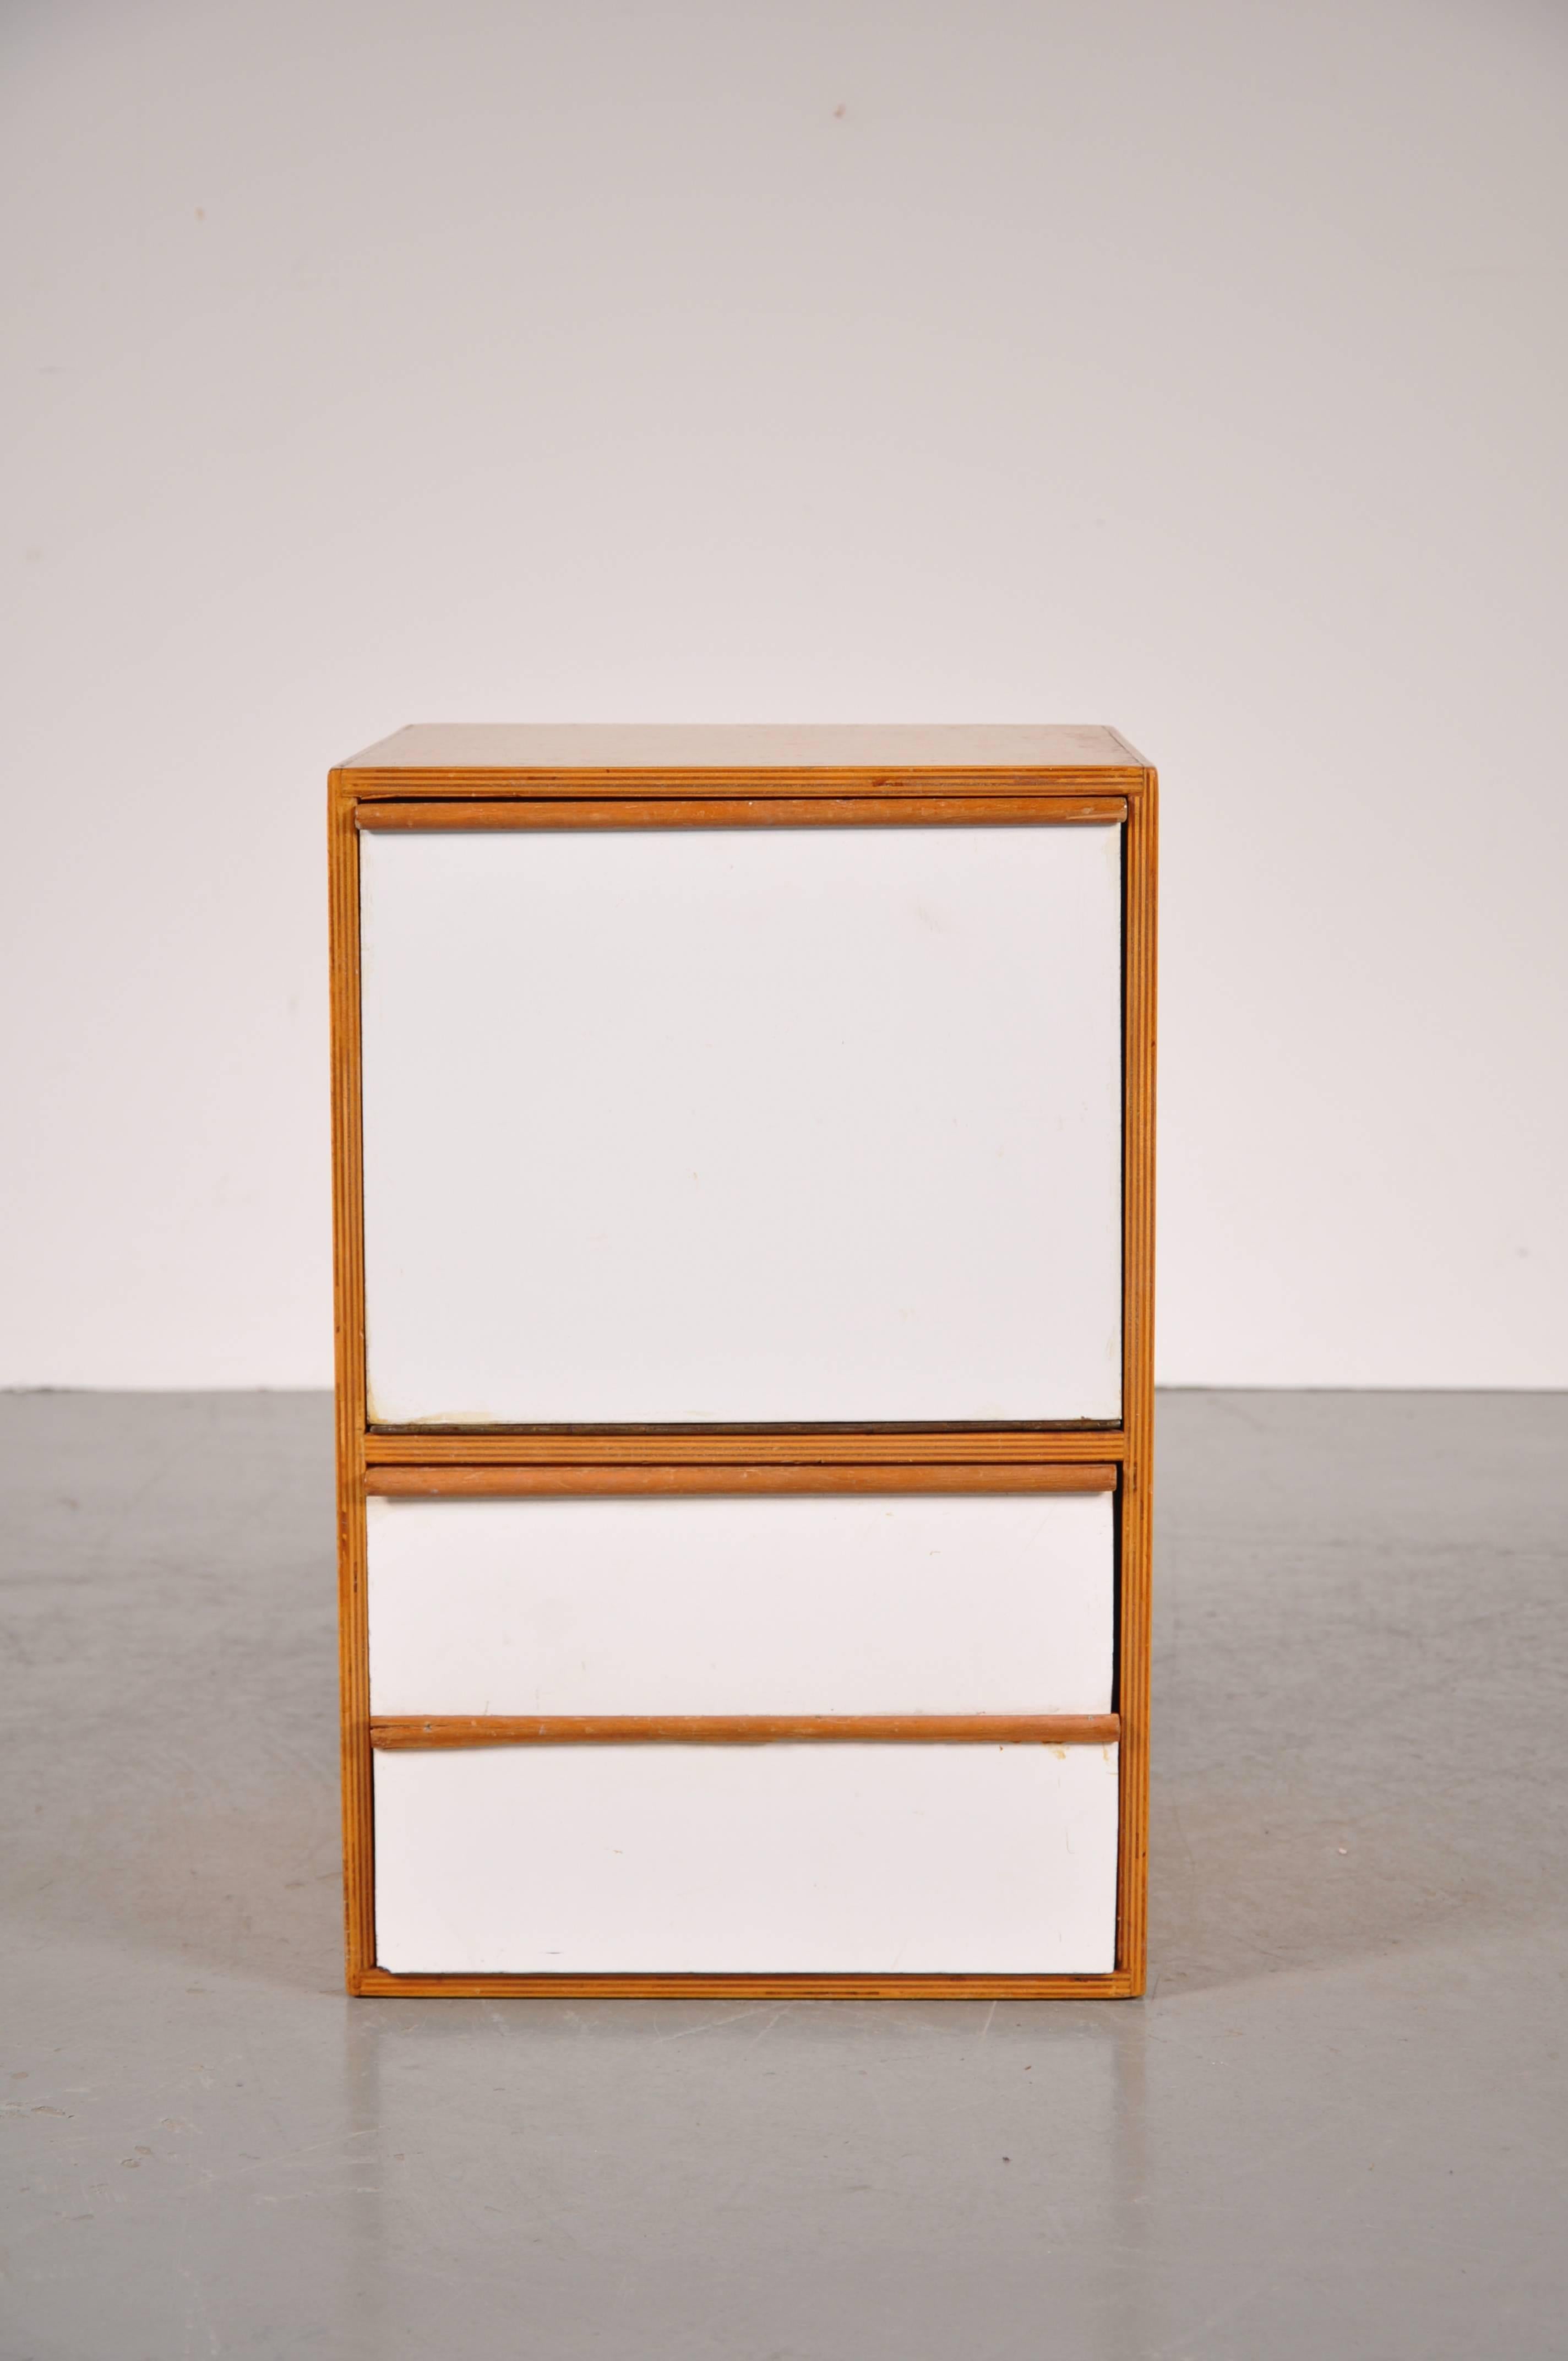 Minimalistic small Dutch cabinet attributed to Gerrit Rietveld Jr., manufactured in The Netherlands around 1950.

The cabinet has a white laminated door and two drawers. This piece comes from the same house as the four Rietveld chairs we have